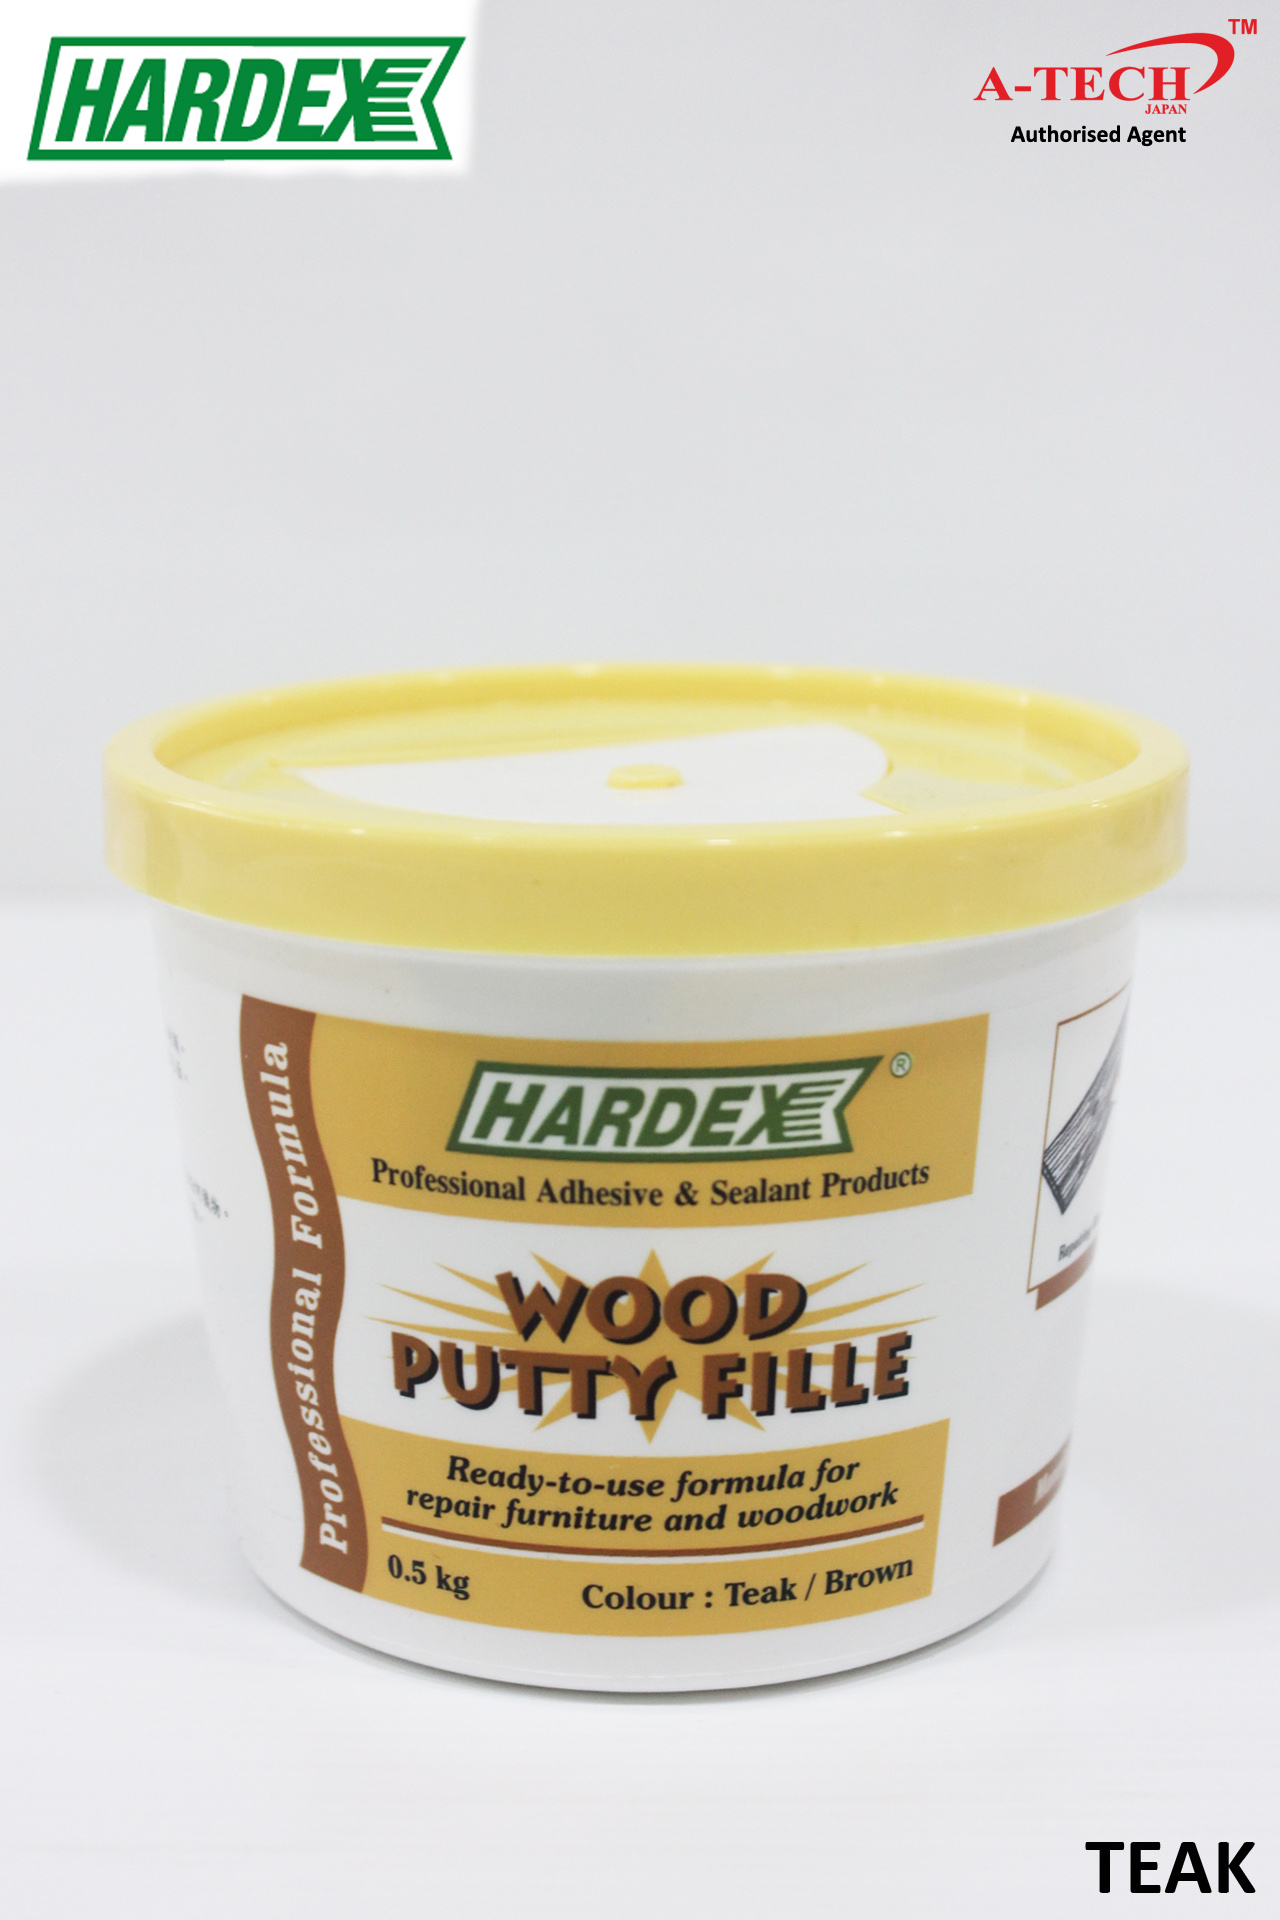 V-TECH] Wood Filler Water Based Putty 500g Brown